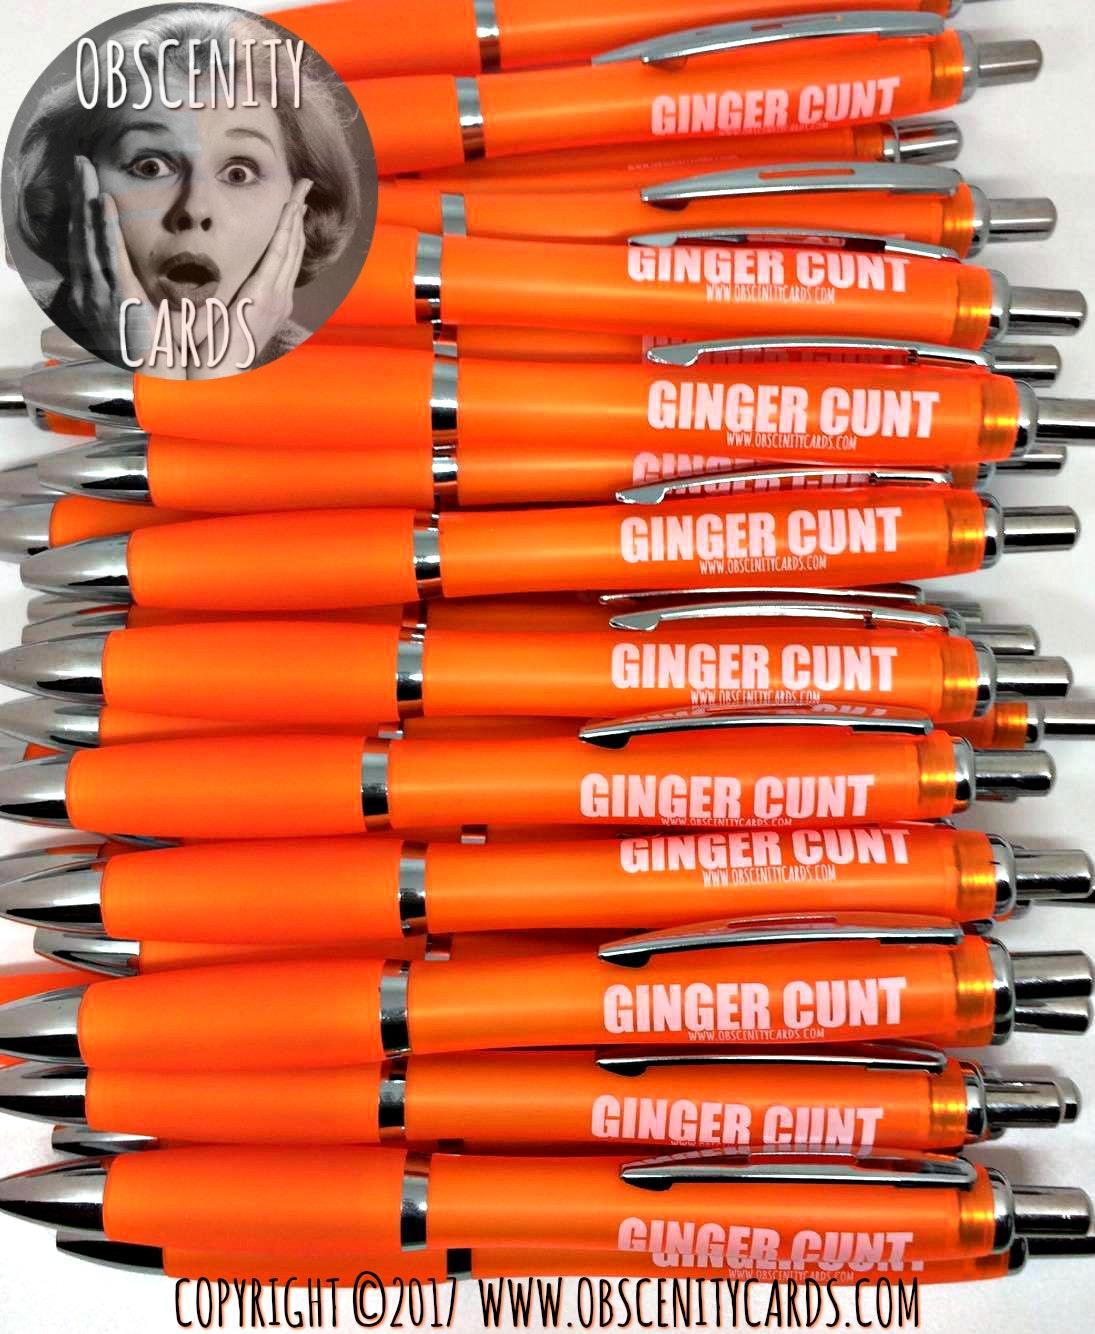 FUNNY NOVELTY PENS. Obscene funny offensive birthday cards by Obscenity cards. Obscene Funny Cards, Pens, Party Hats, Key rings, Magnets, Lighters & Loads More!